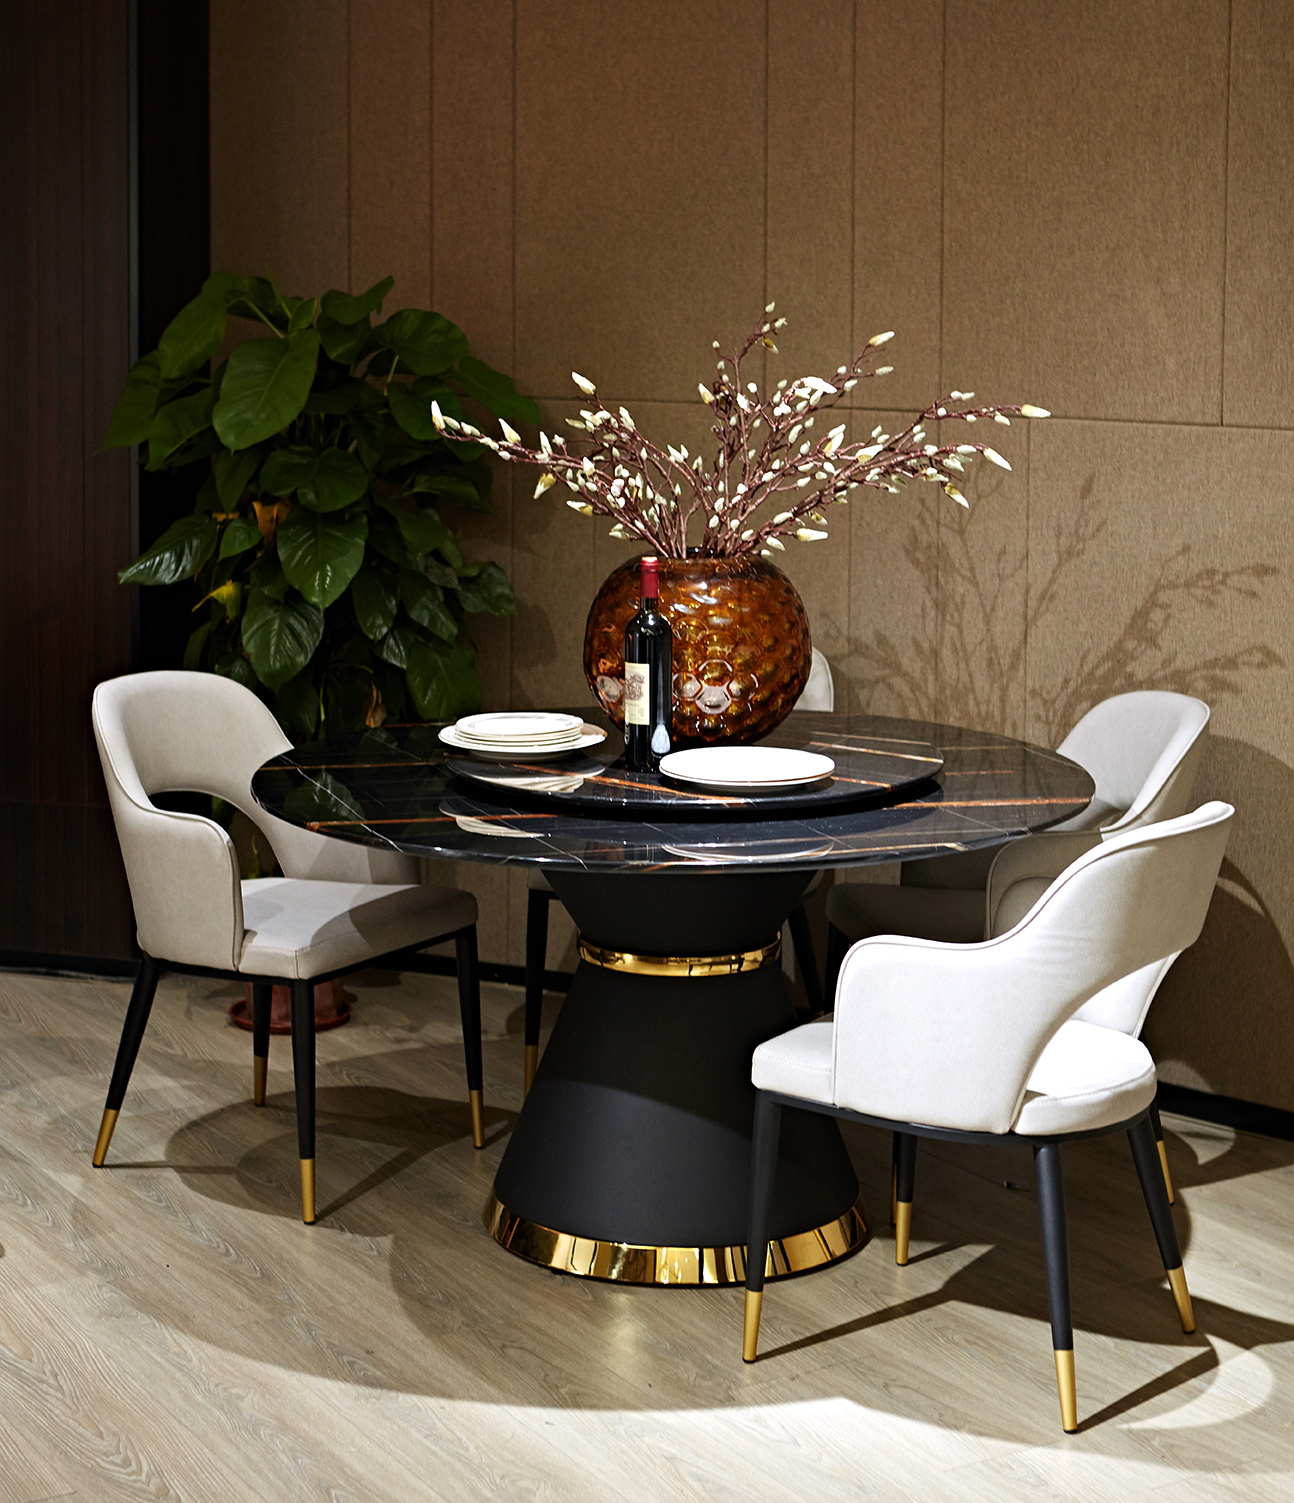 C1079 ROUND MARBLE DINING TABLE